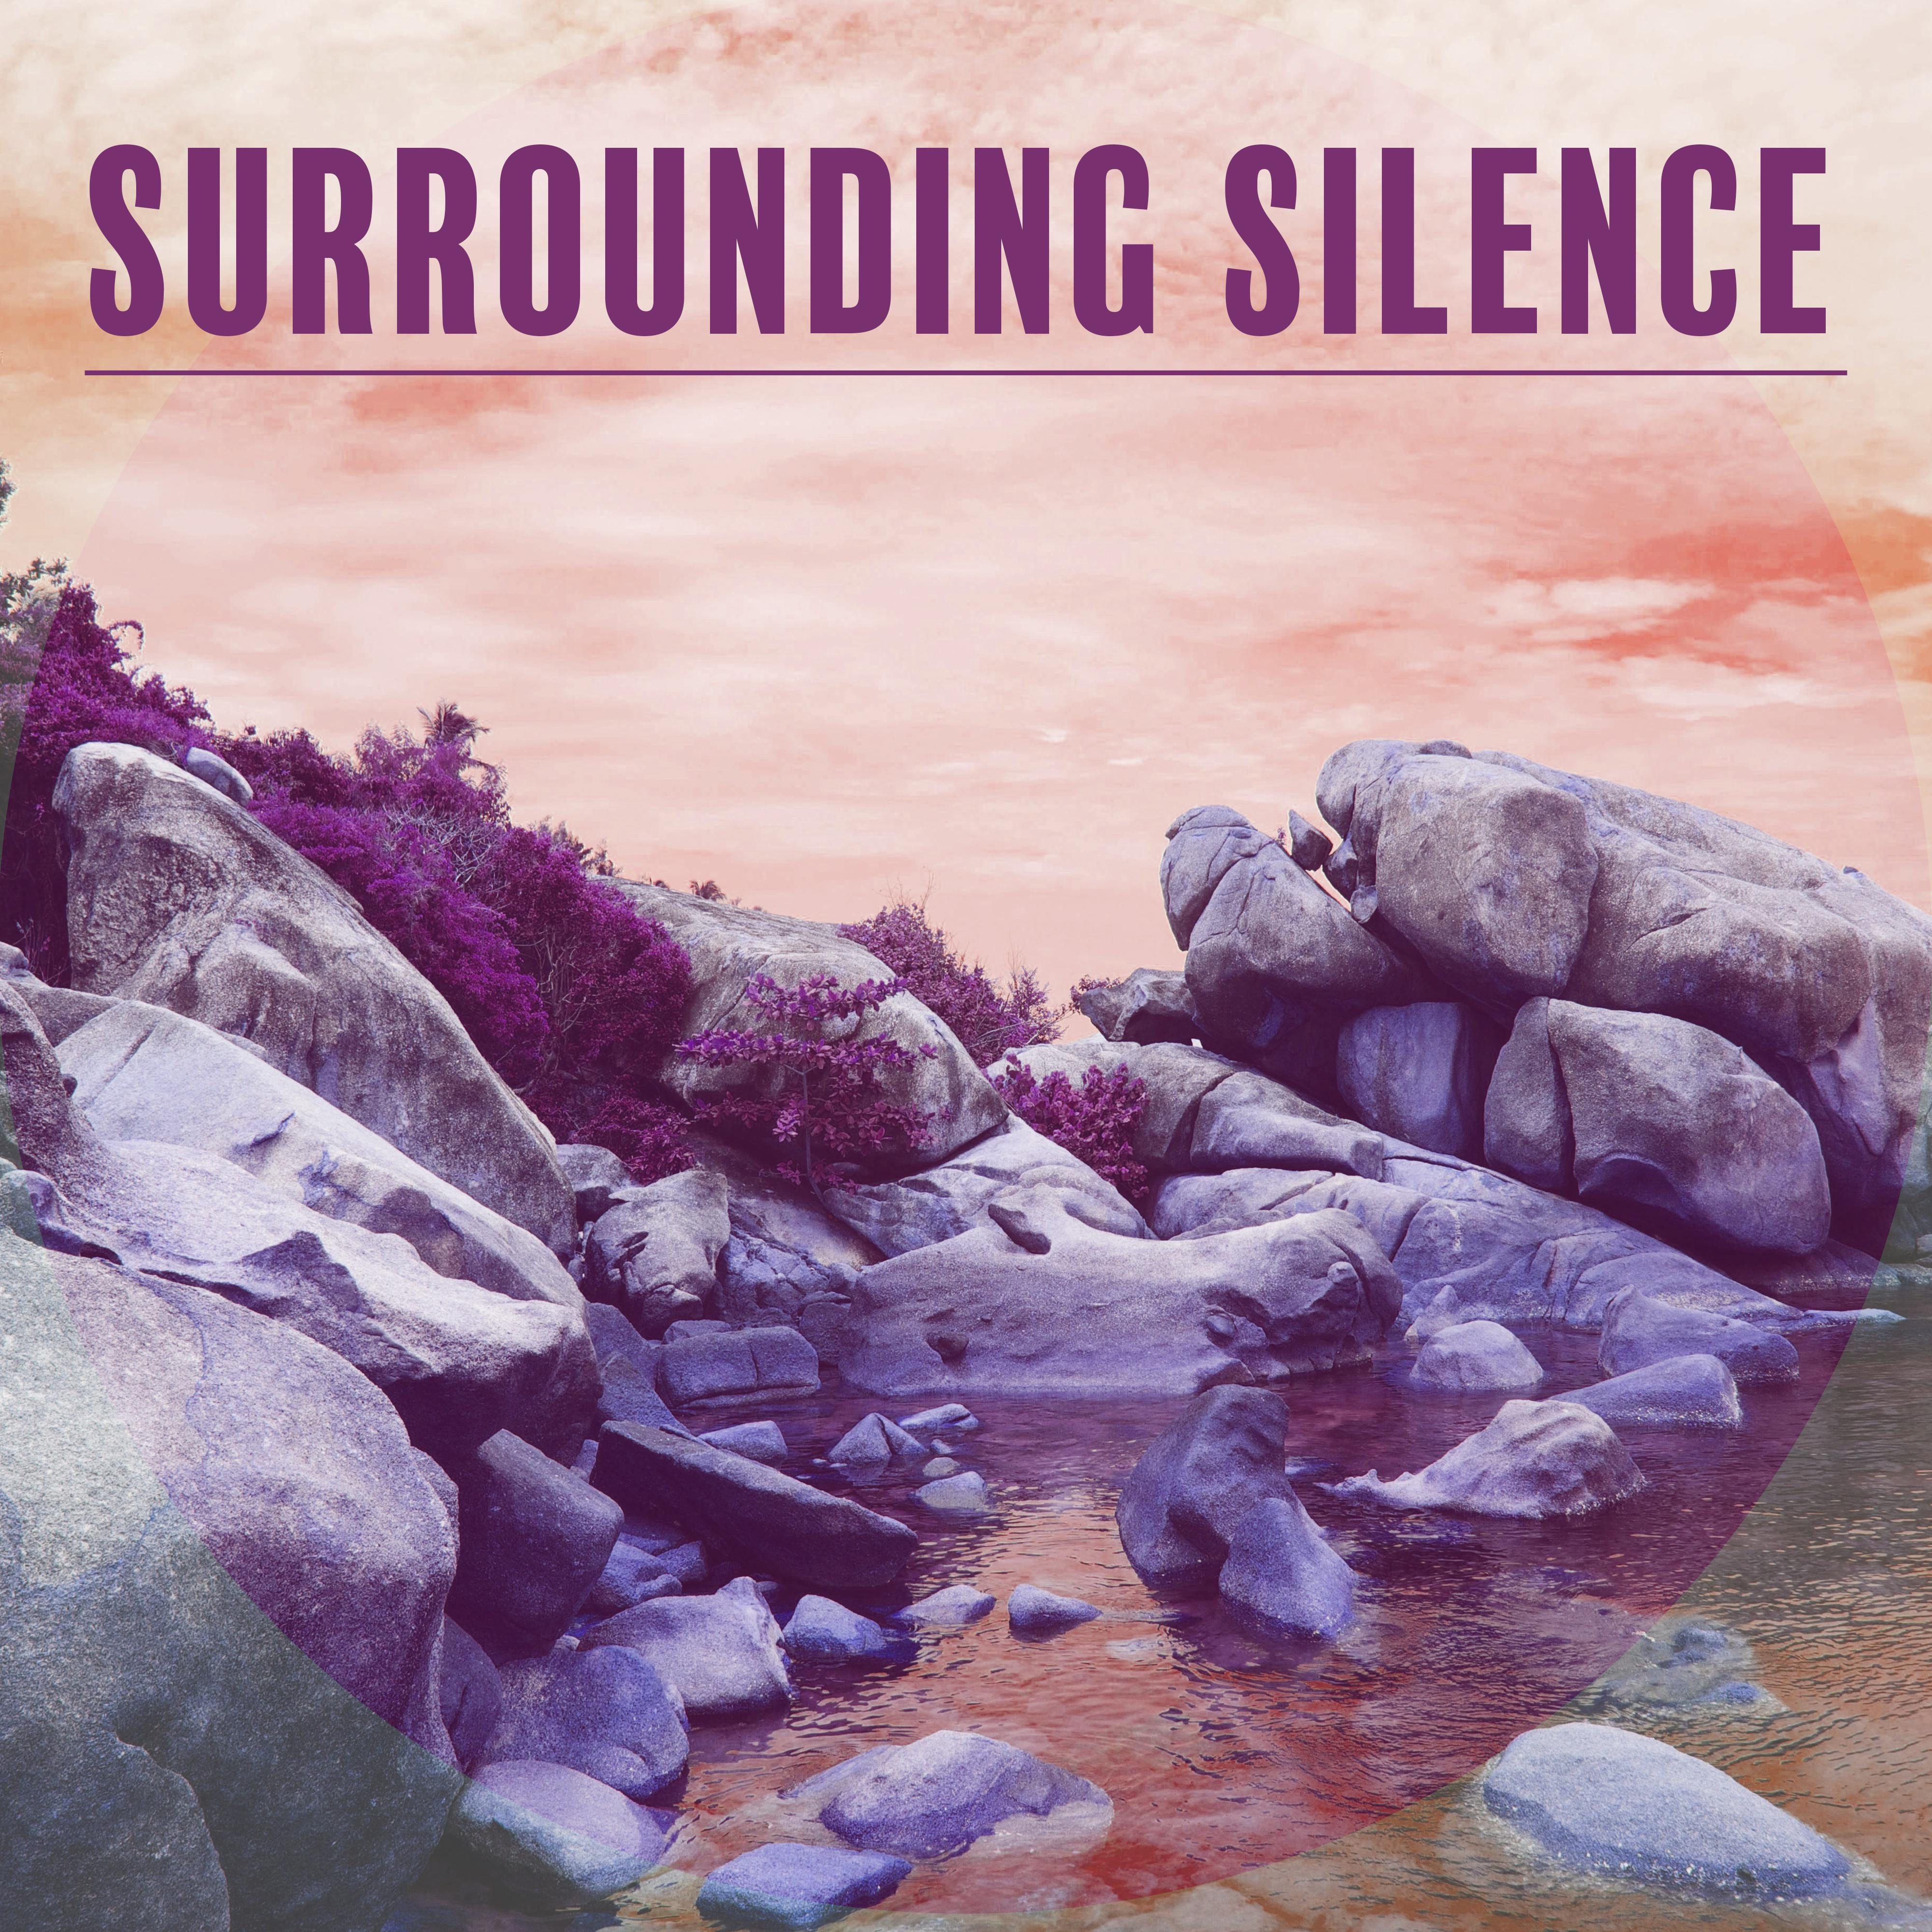 Surrounding Silence - Wait for Tranquility, Time for Rest, Full Relax, Relaxation at the Fireplace